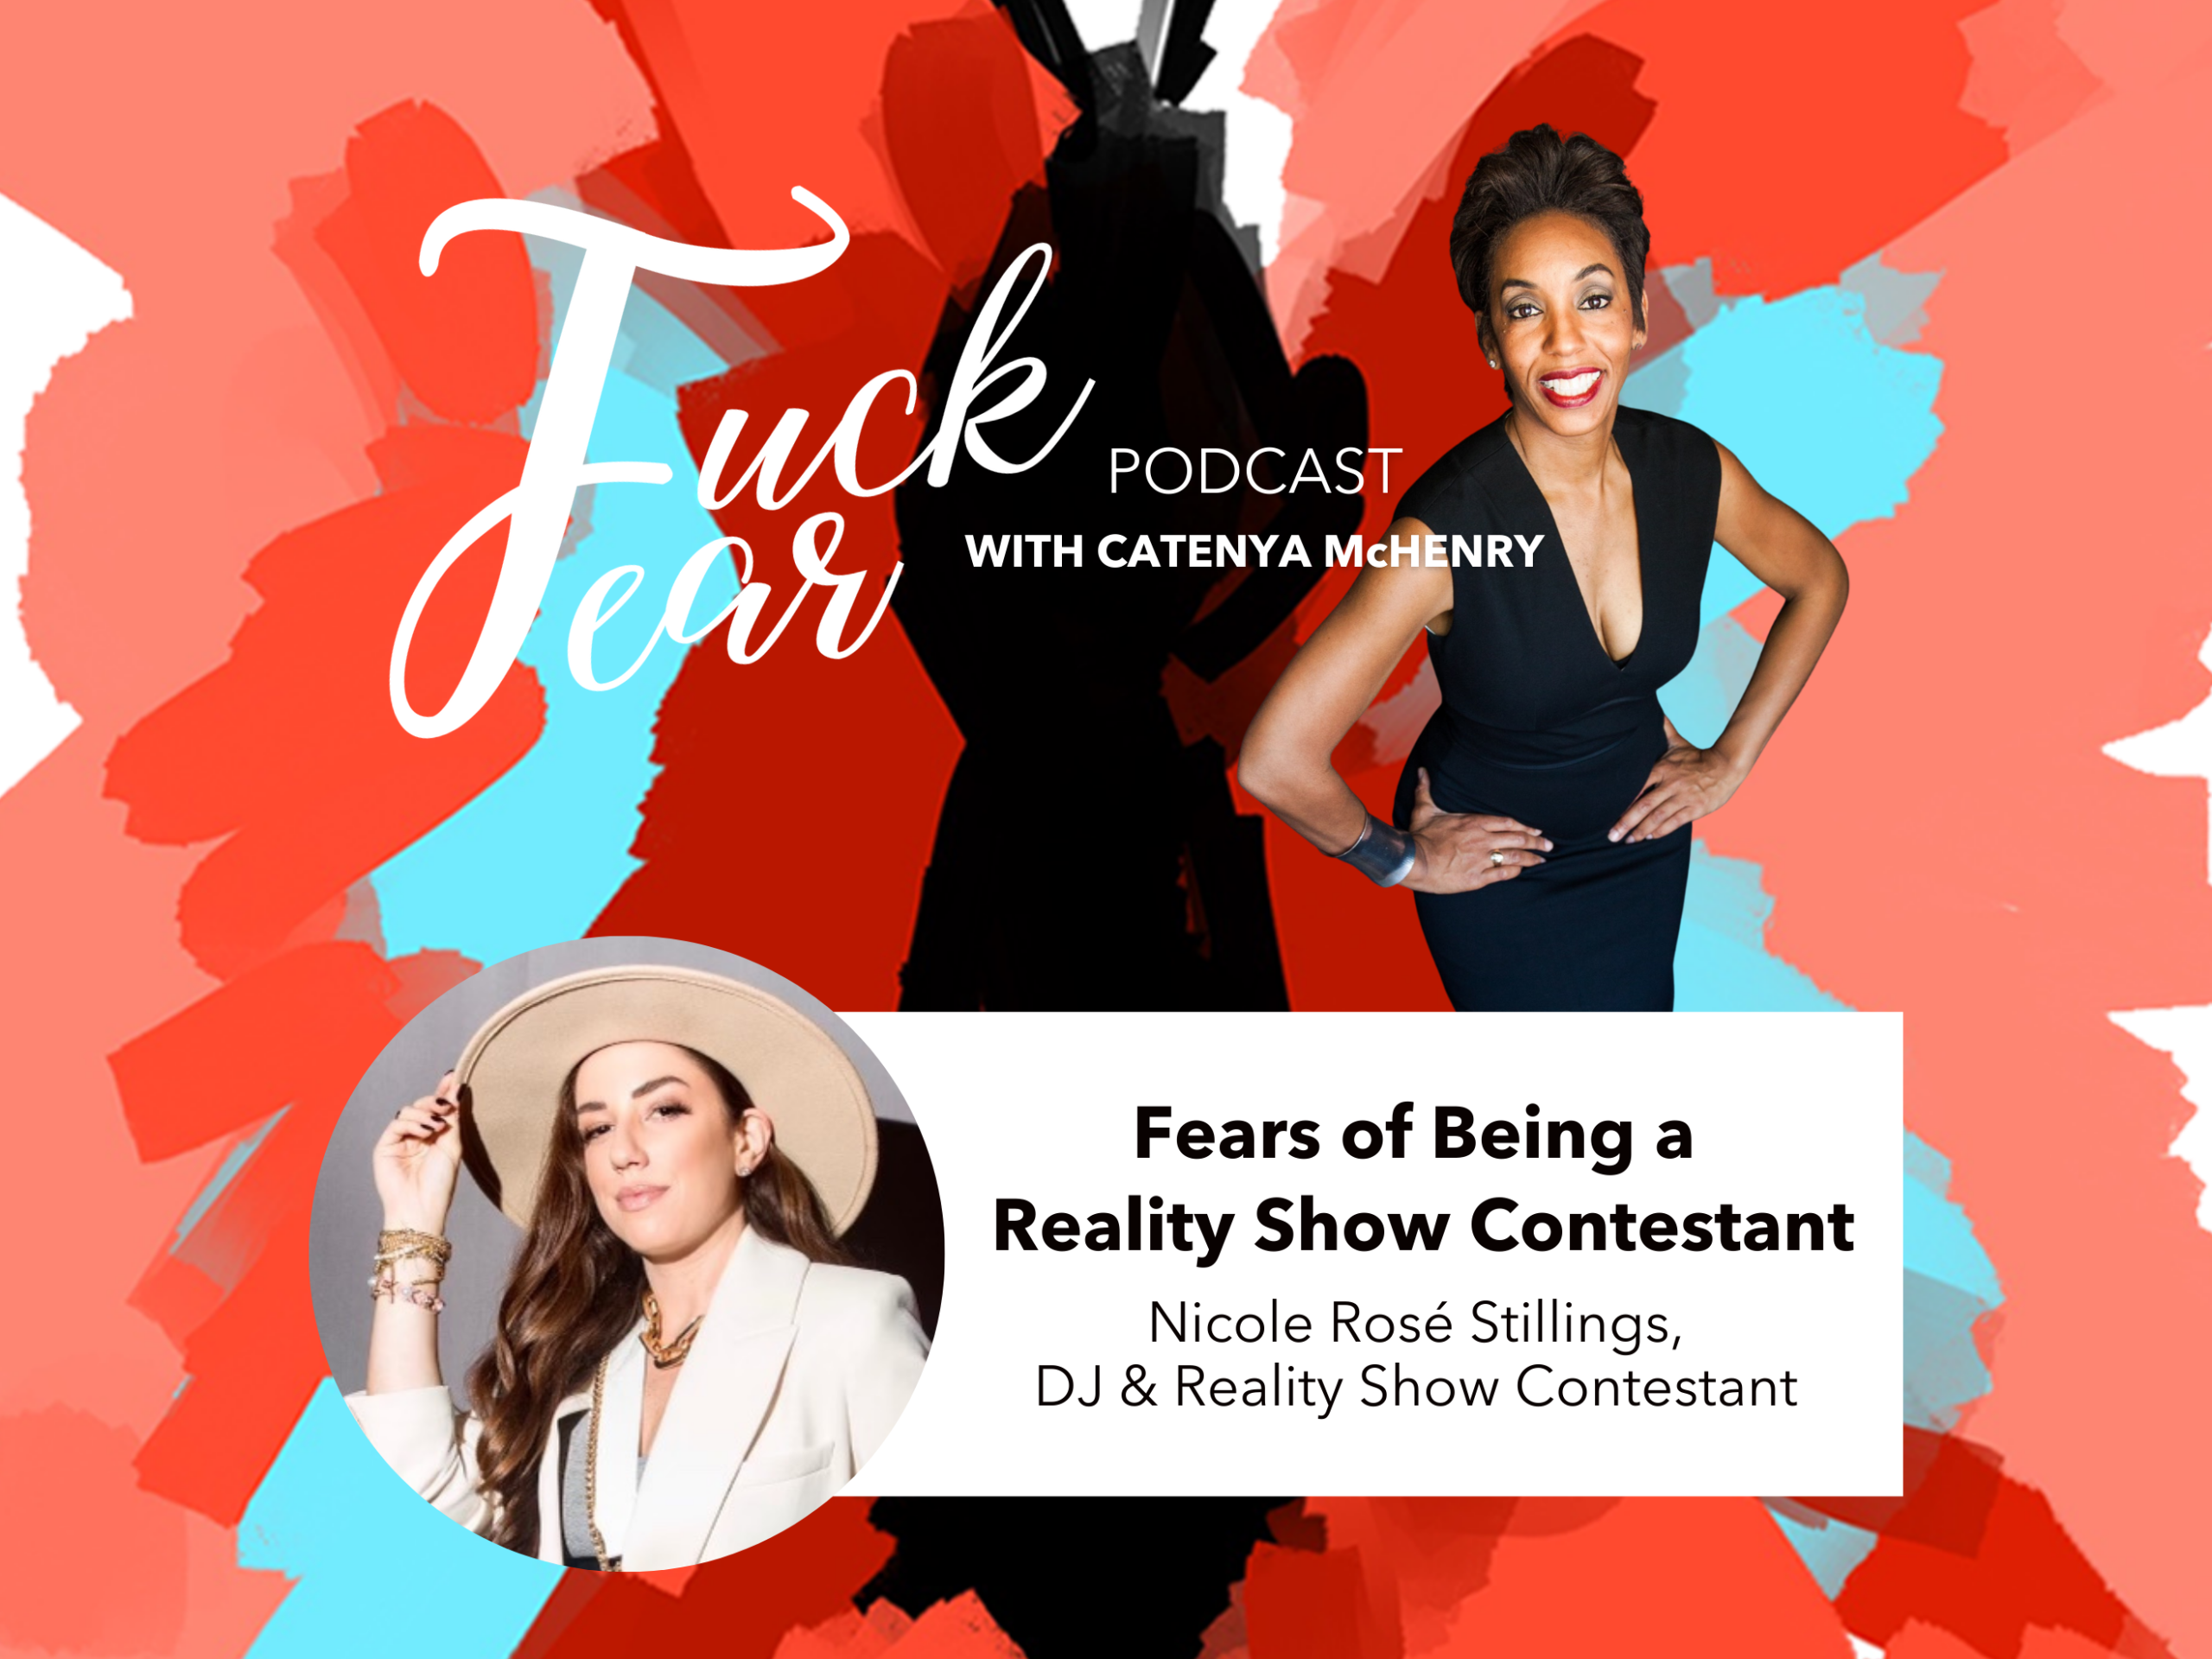 Fears of Being a Reality Show Contestant with Fuck Fear podcast host Catenya McHenry and guest Nicole Rose Stillings of The Big Shot with Bethenny Frankel